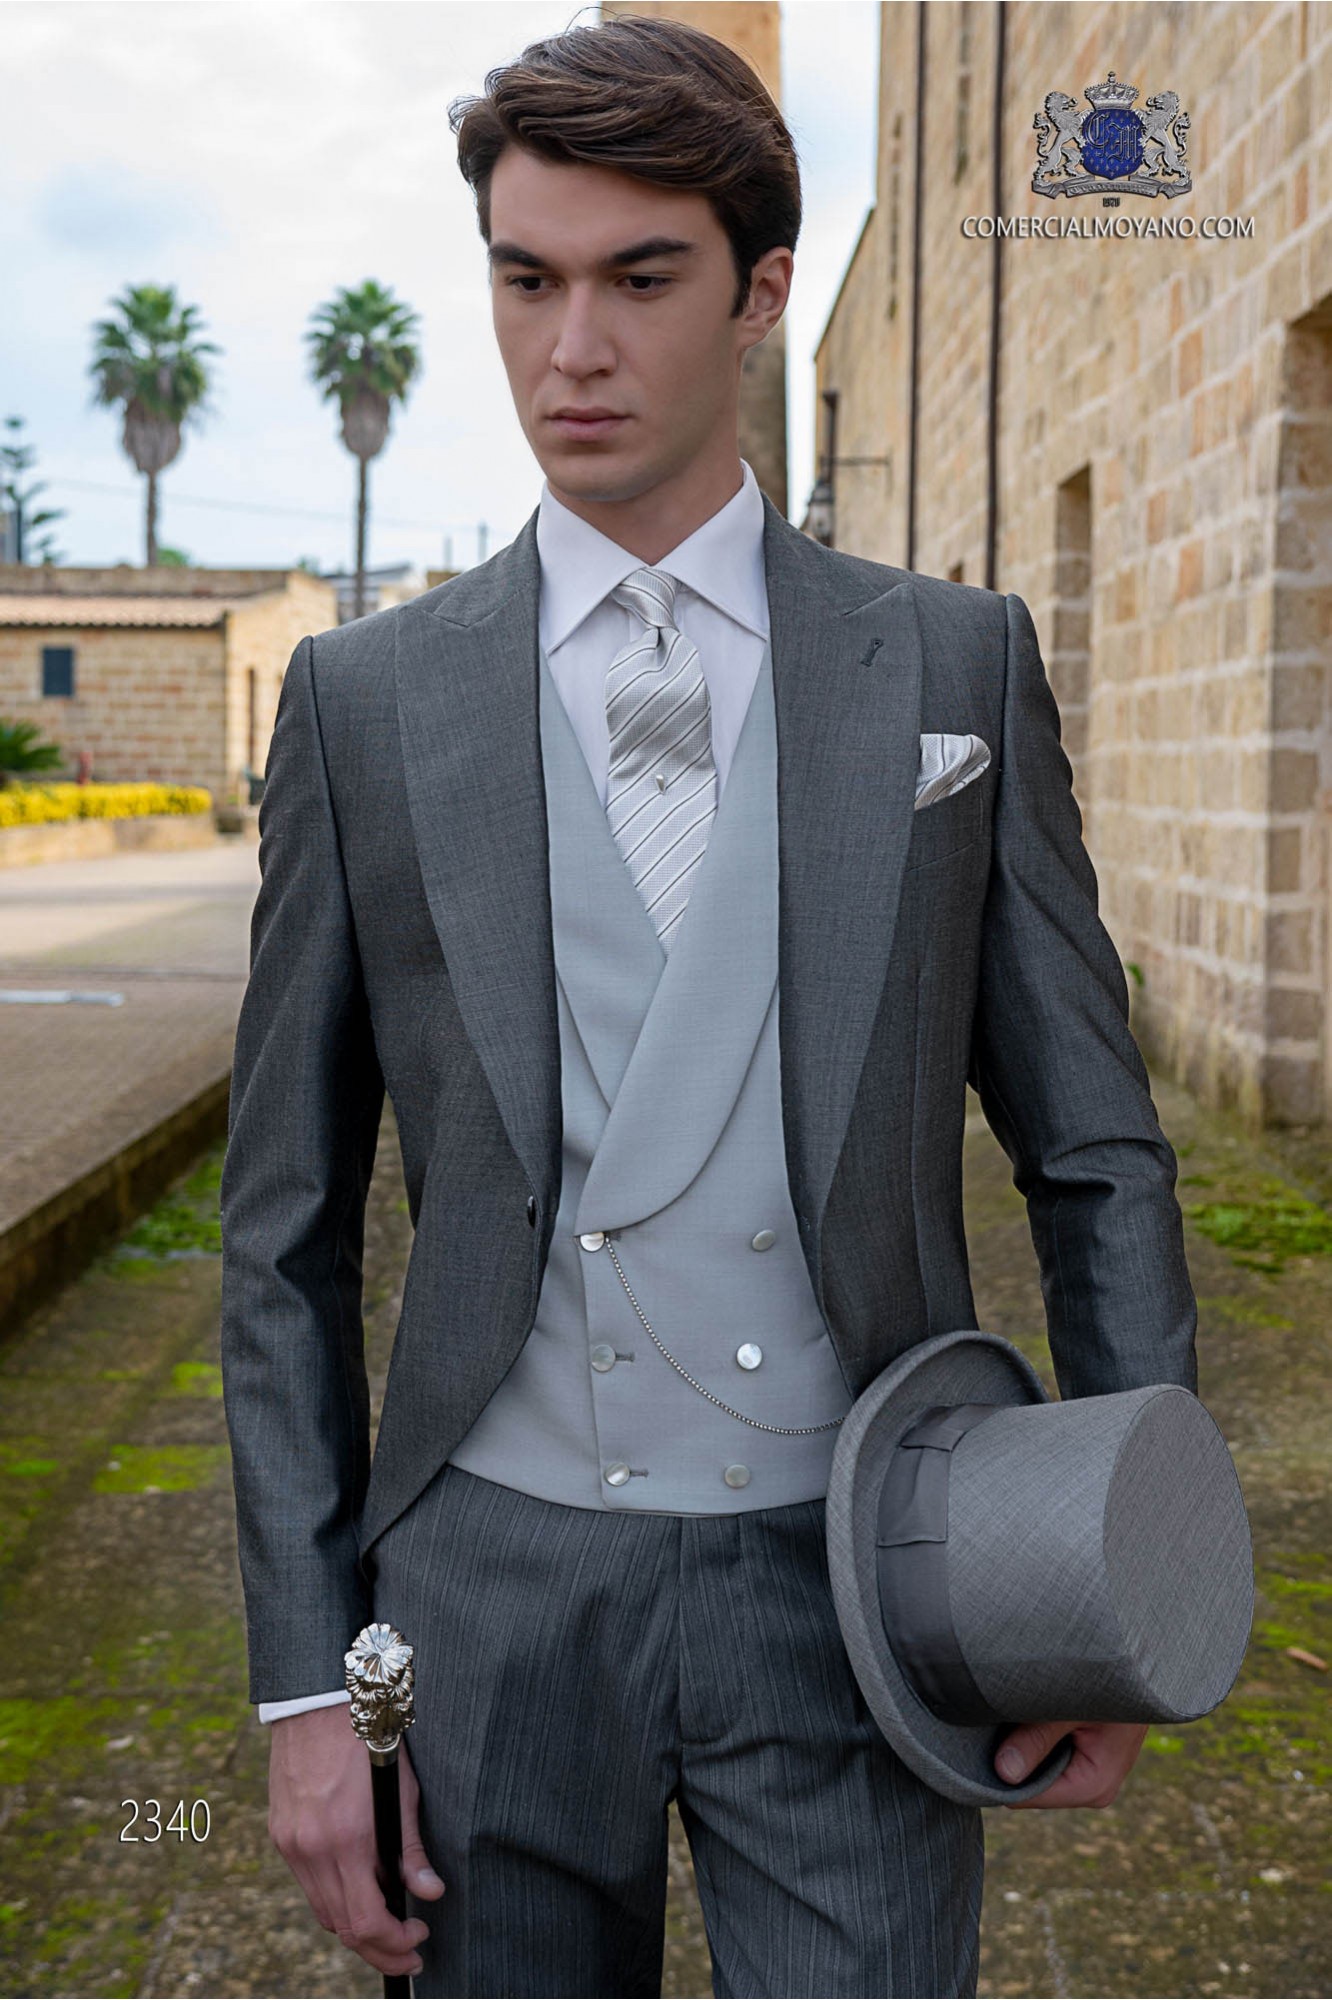 Morning suit mohair wool mix alpaca anthracite grey with pinstripe trousers